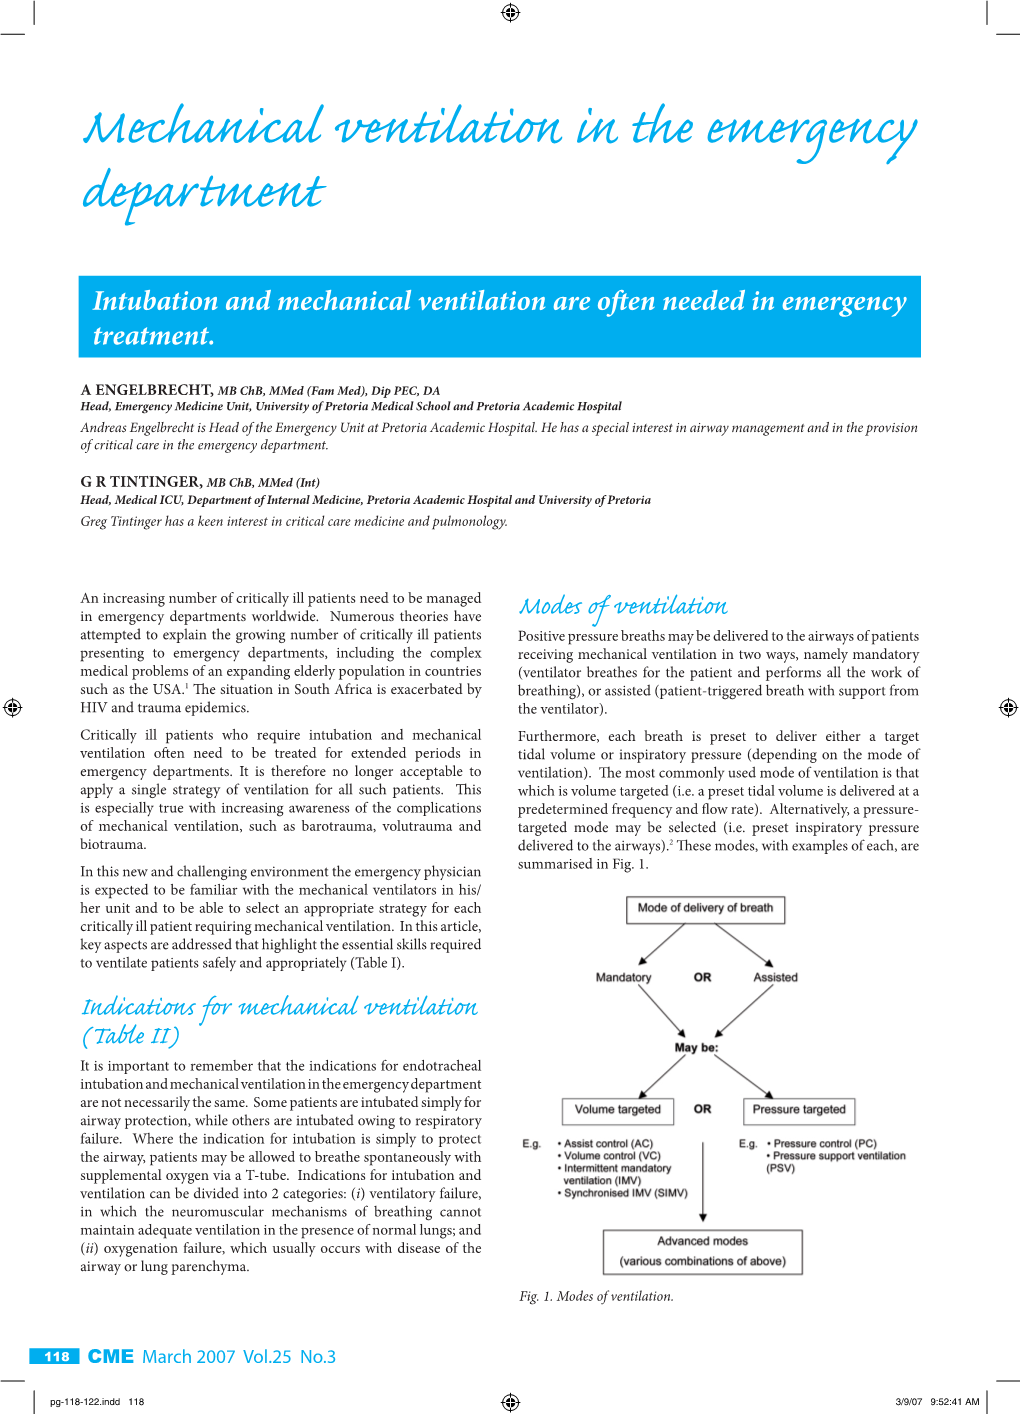 Mechanical Ventilation in the Emergency Department